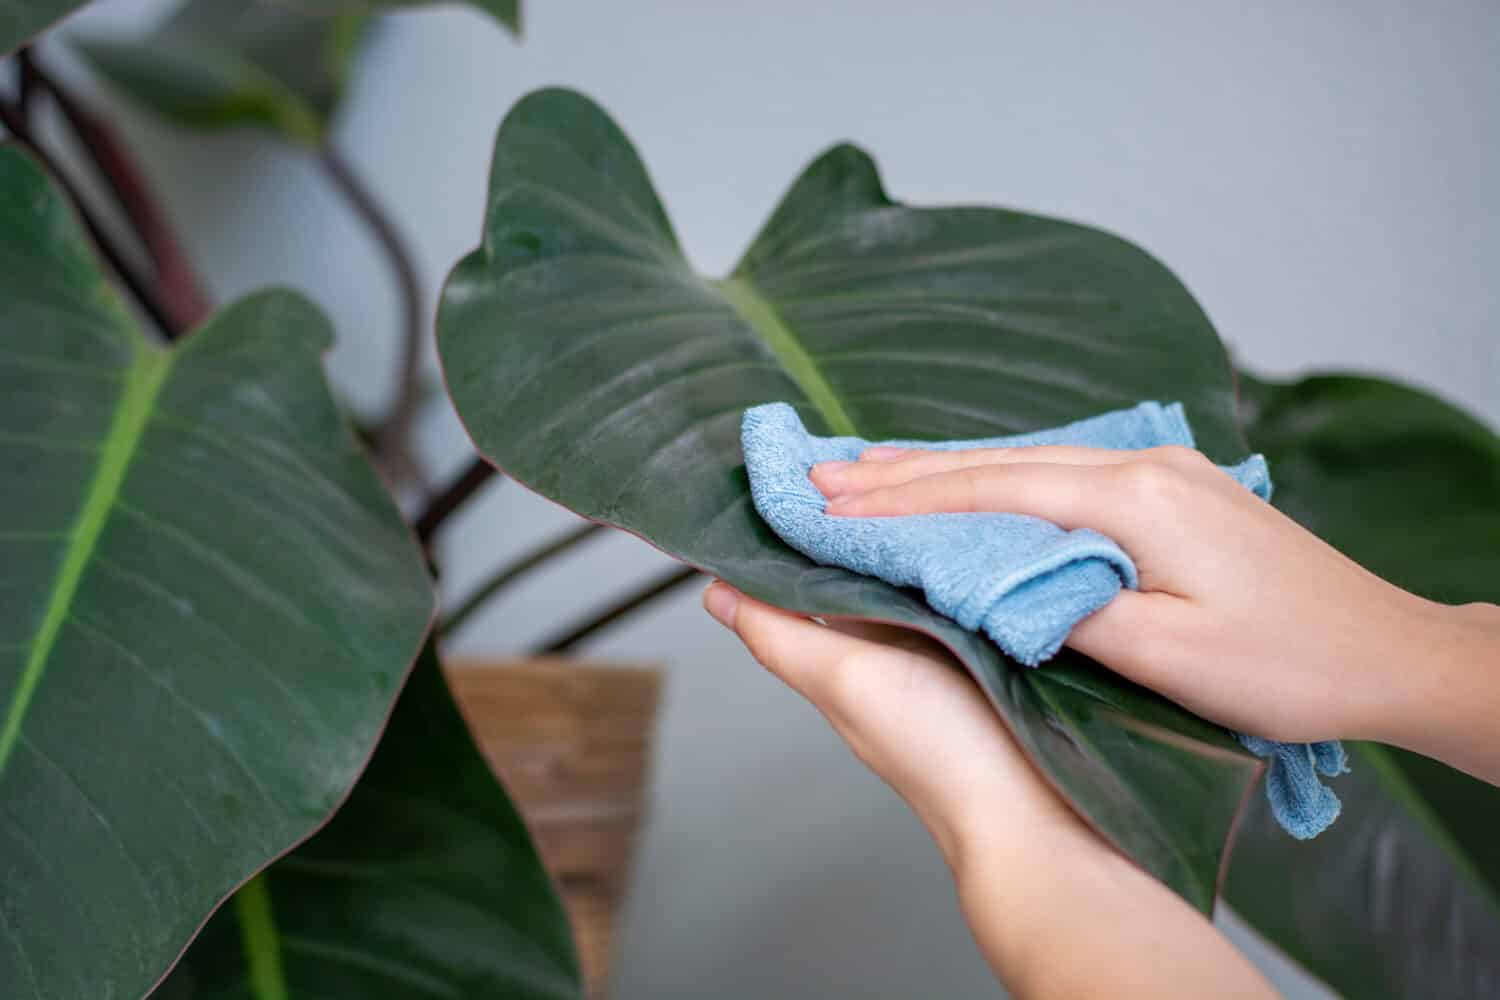 Cleaning dusty green indoor houseplant leaves. Woman hands wiping the dust off a large leave of a house plant with a blue rag